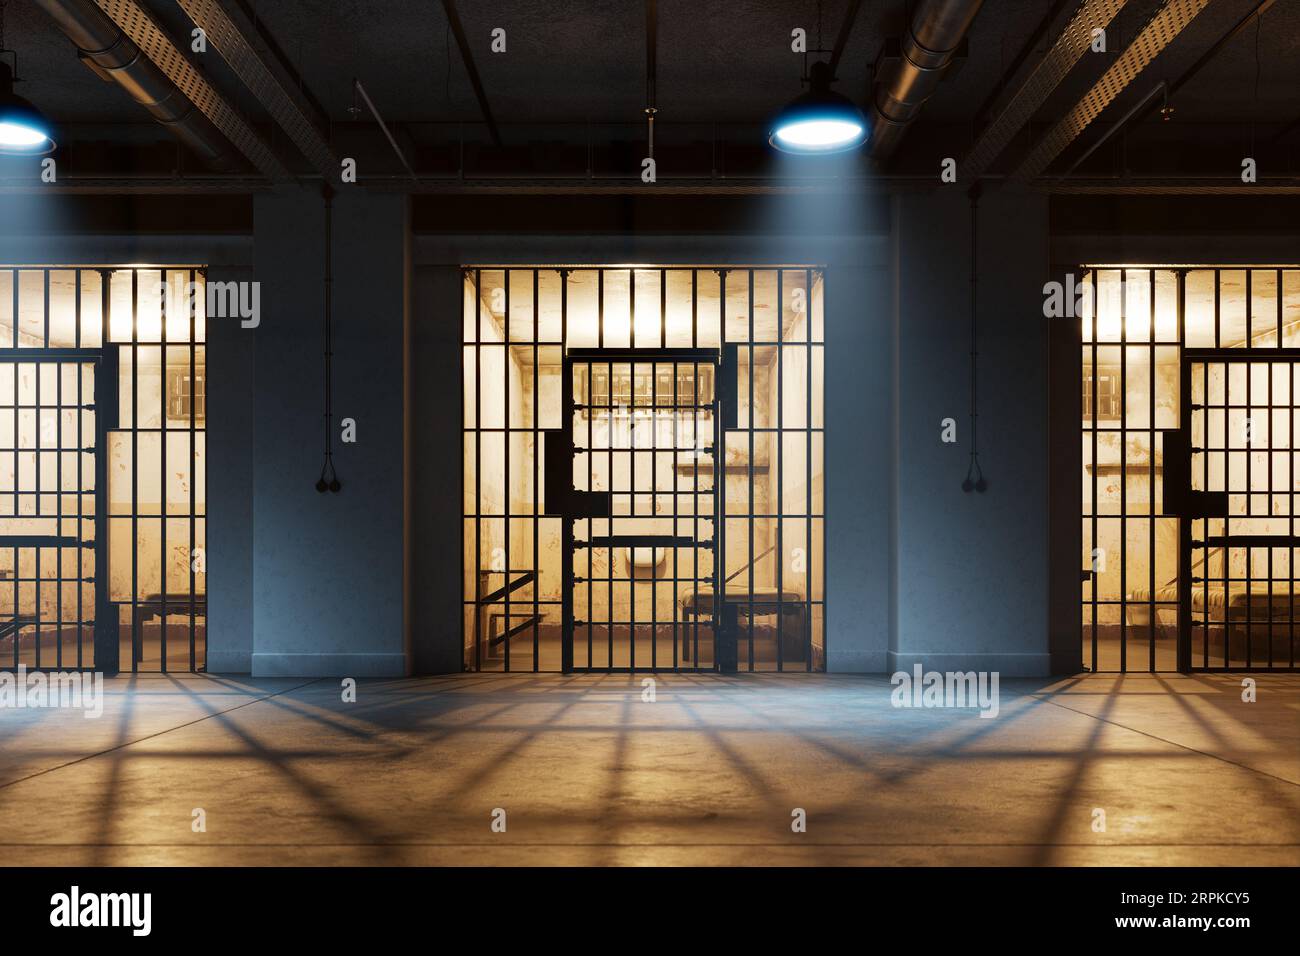 The gloomy interior of a single occupancy cells in an old jail. Life behind bars Stock Photo